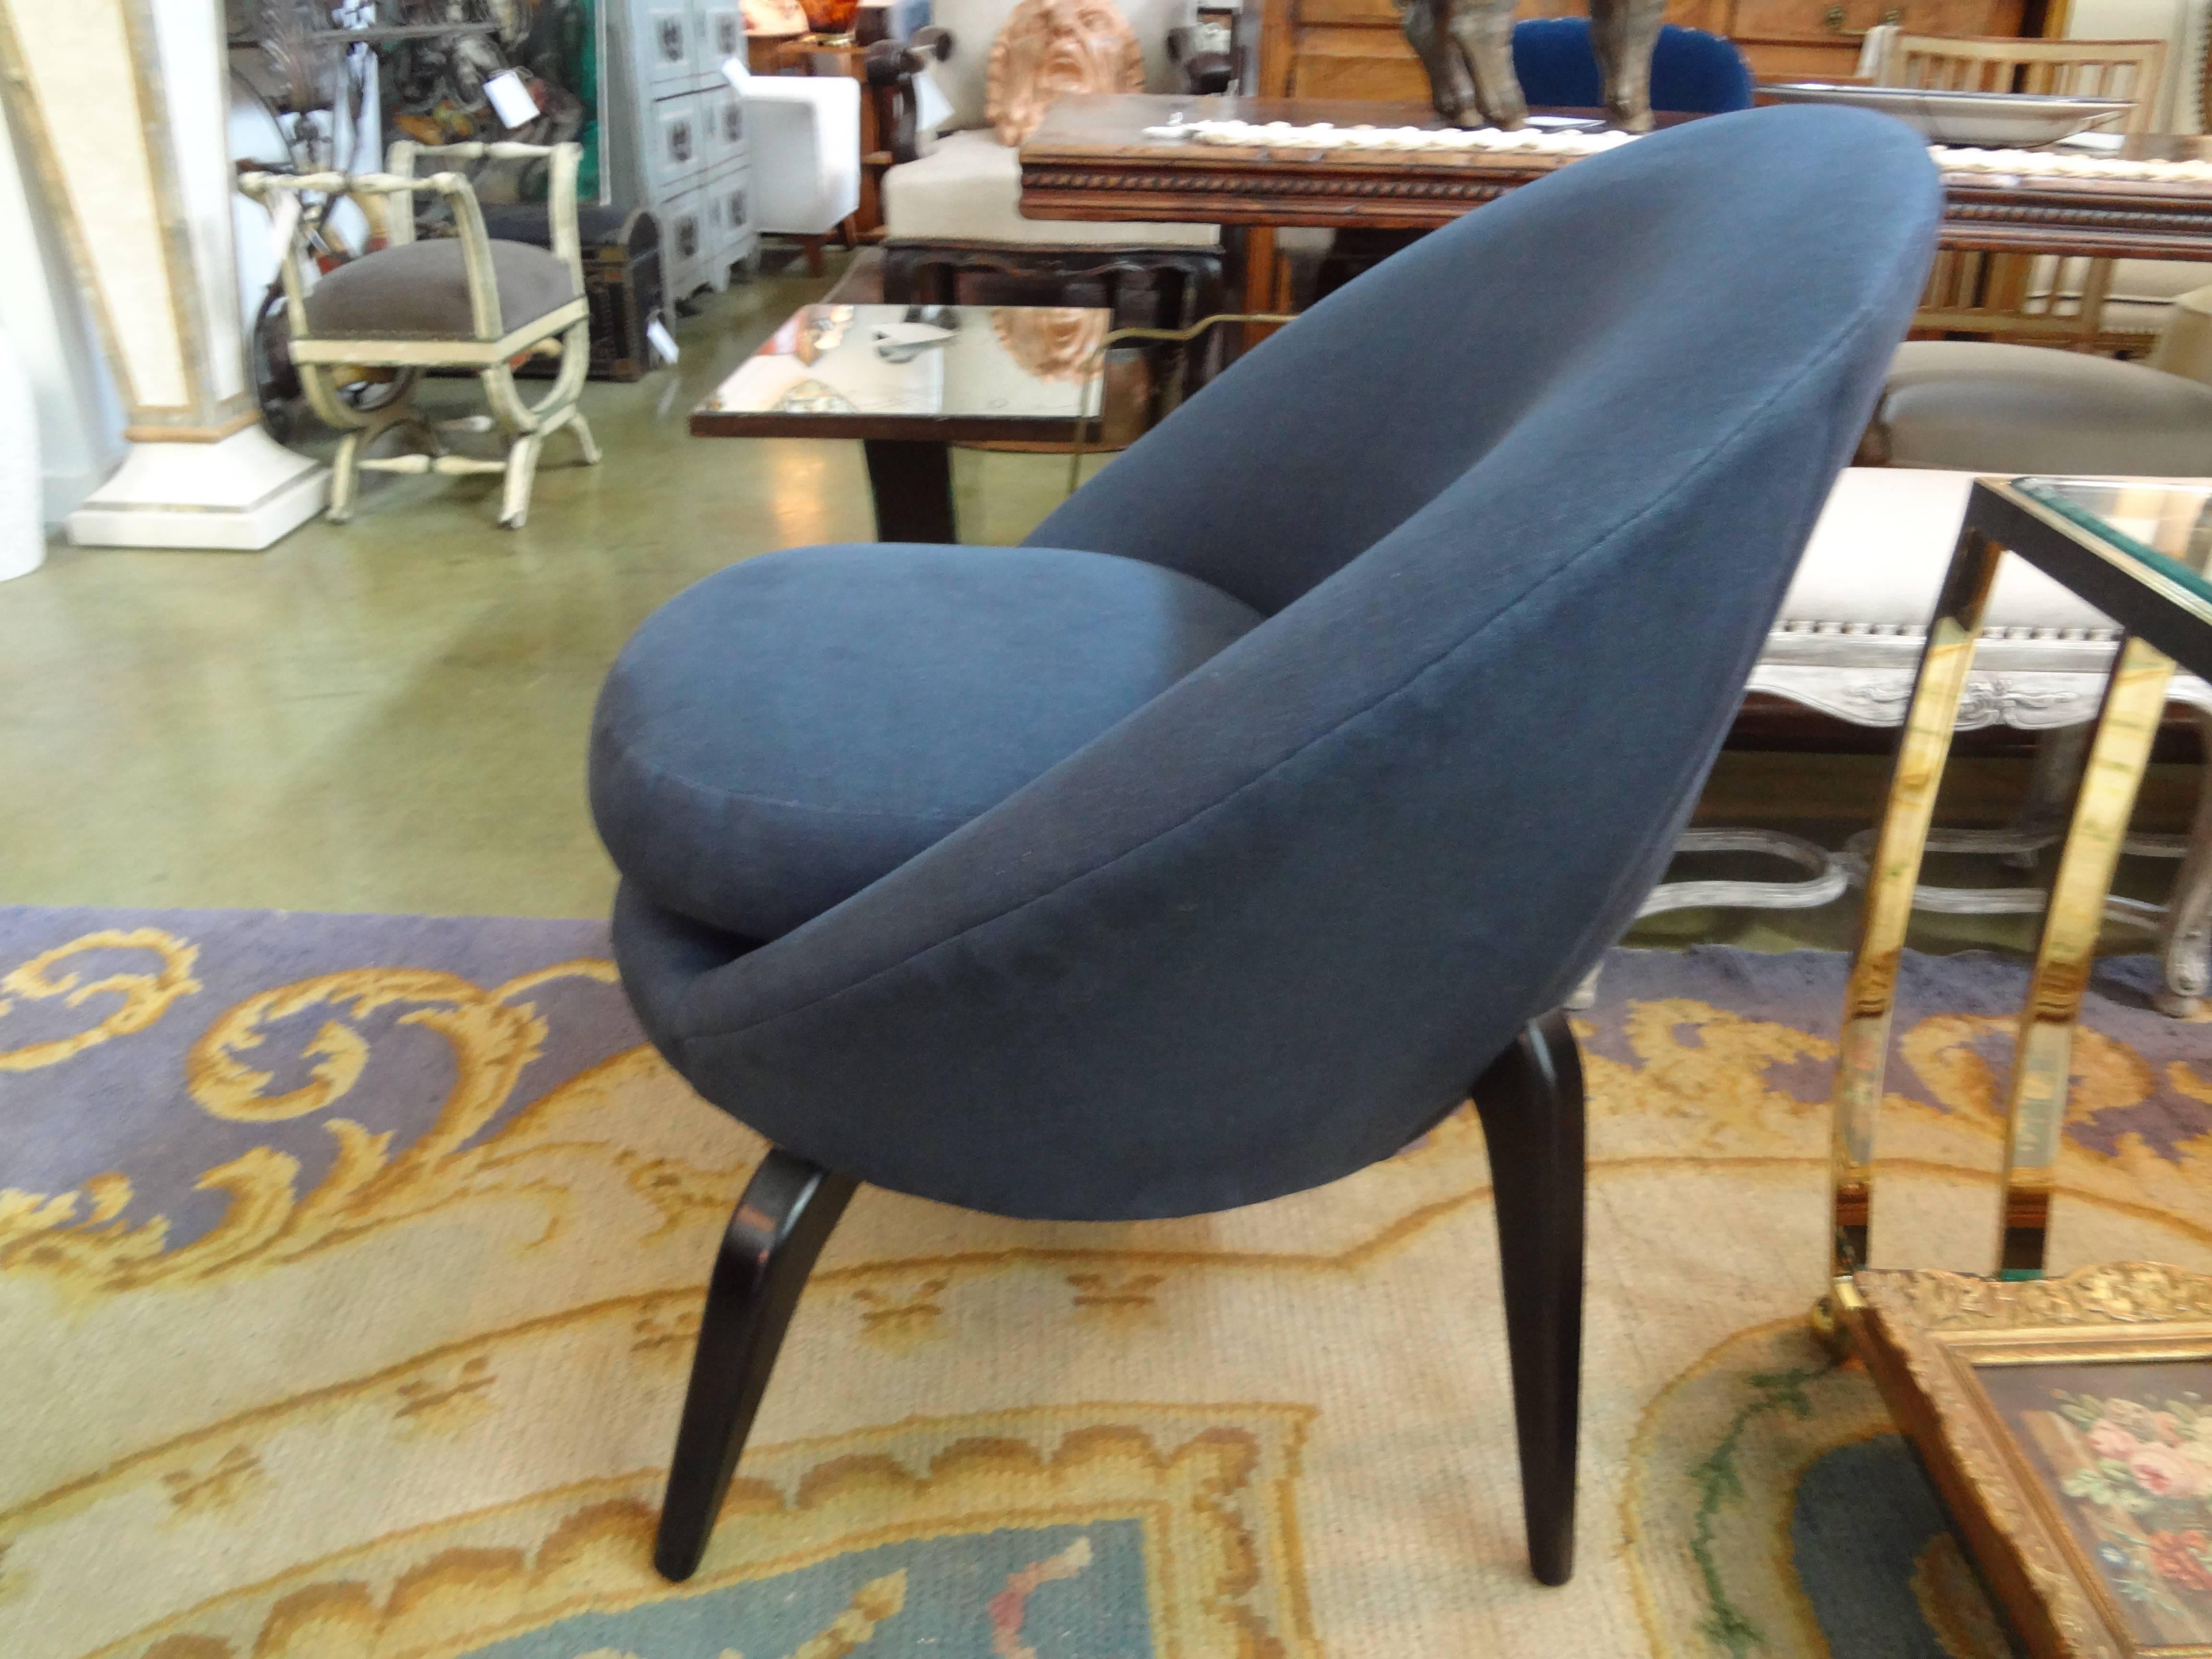 Fabulous French Mid-Century Modern chair with exaggerated legs in the manner of Jean Royère. Taken down to frame and professionally reupholstered in blue linen.

Please click 